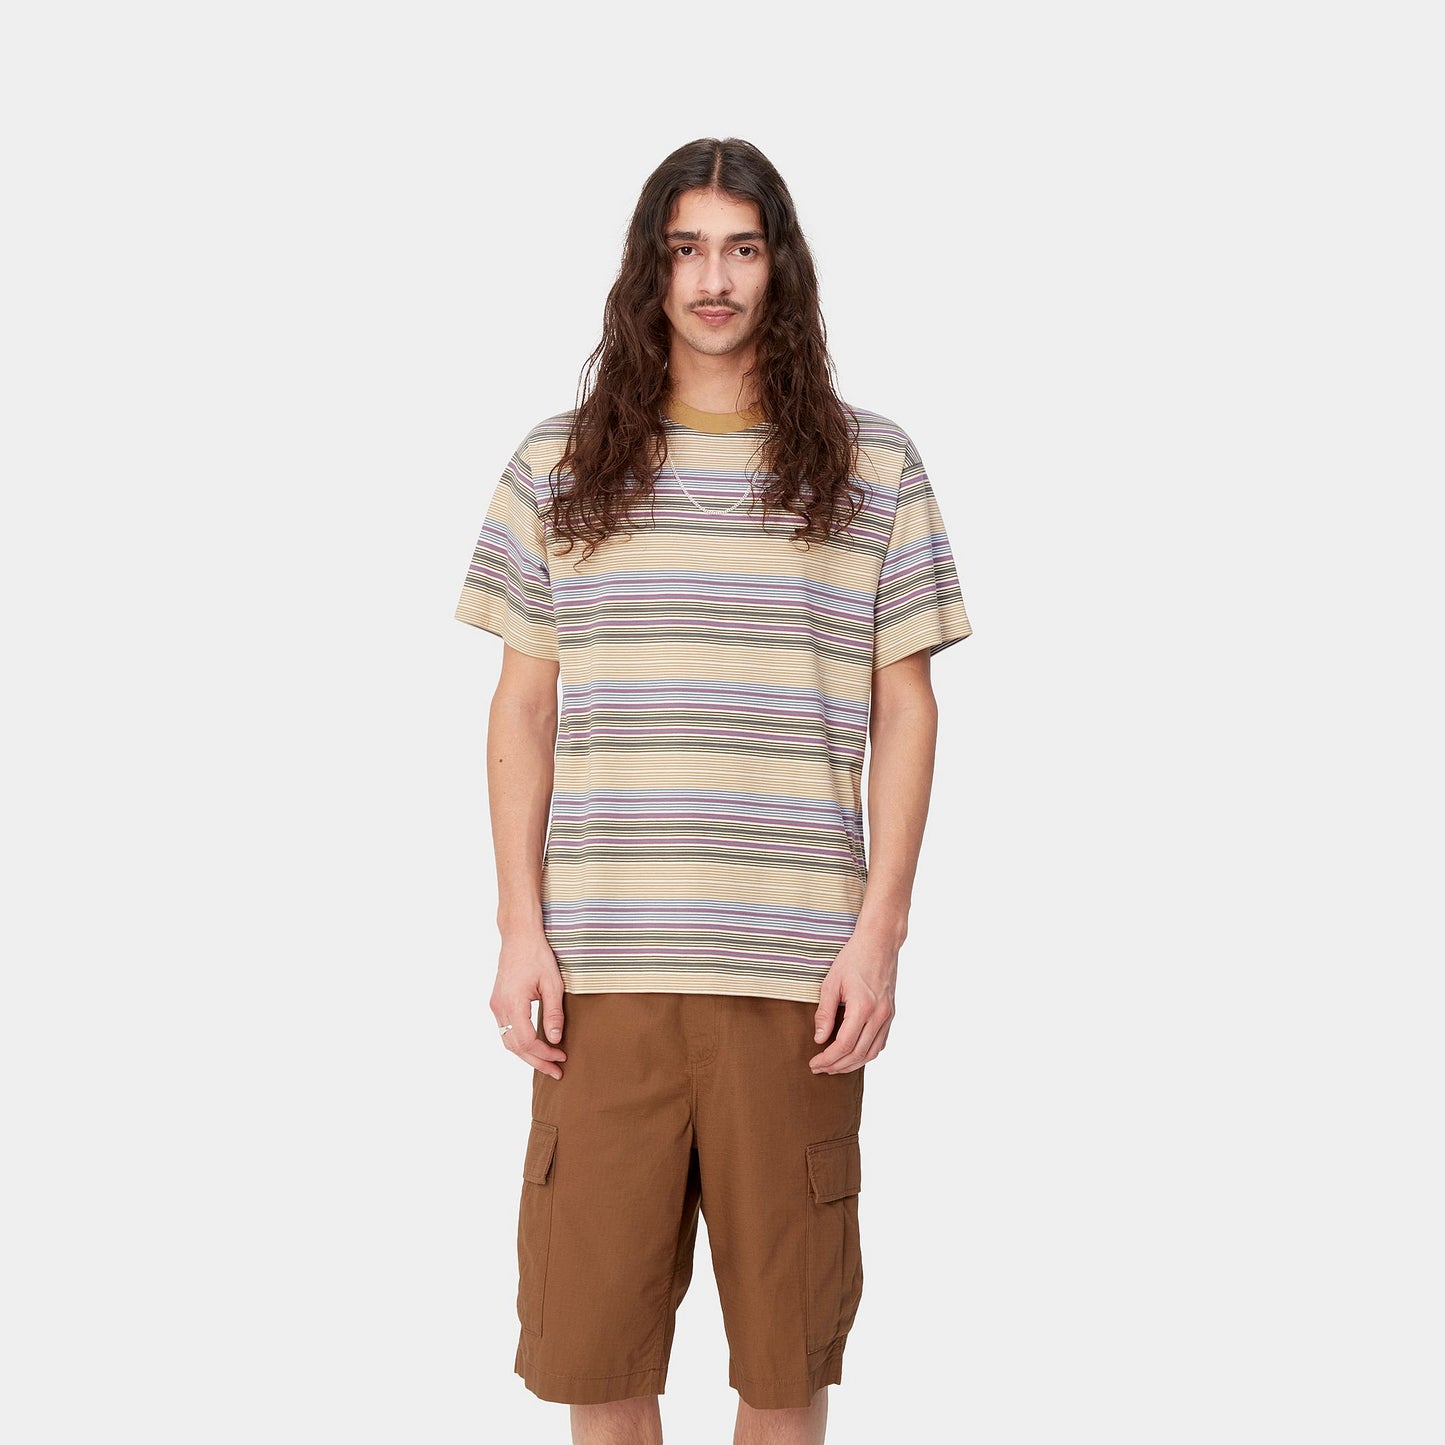 CARHARTT WIP S/S COBY T-Shirt - Colby Stripe Bourbon